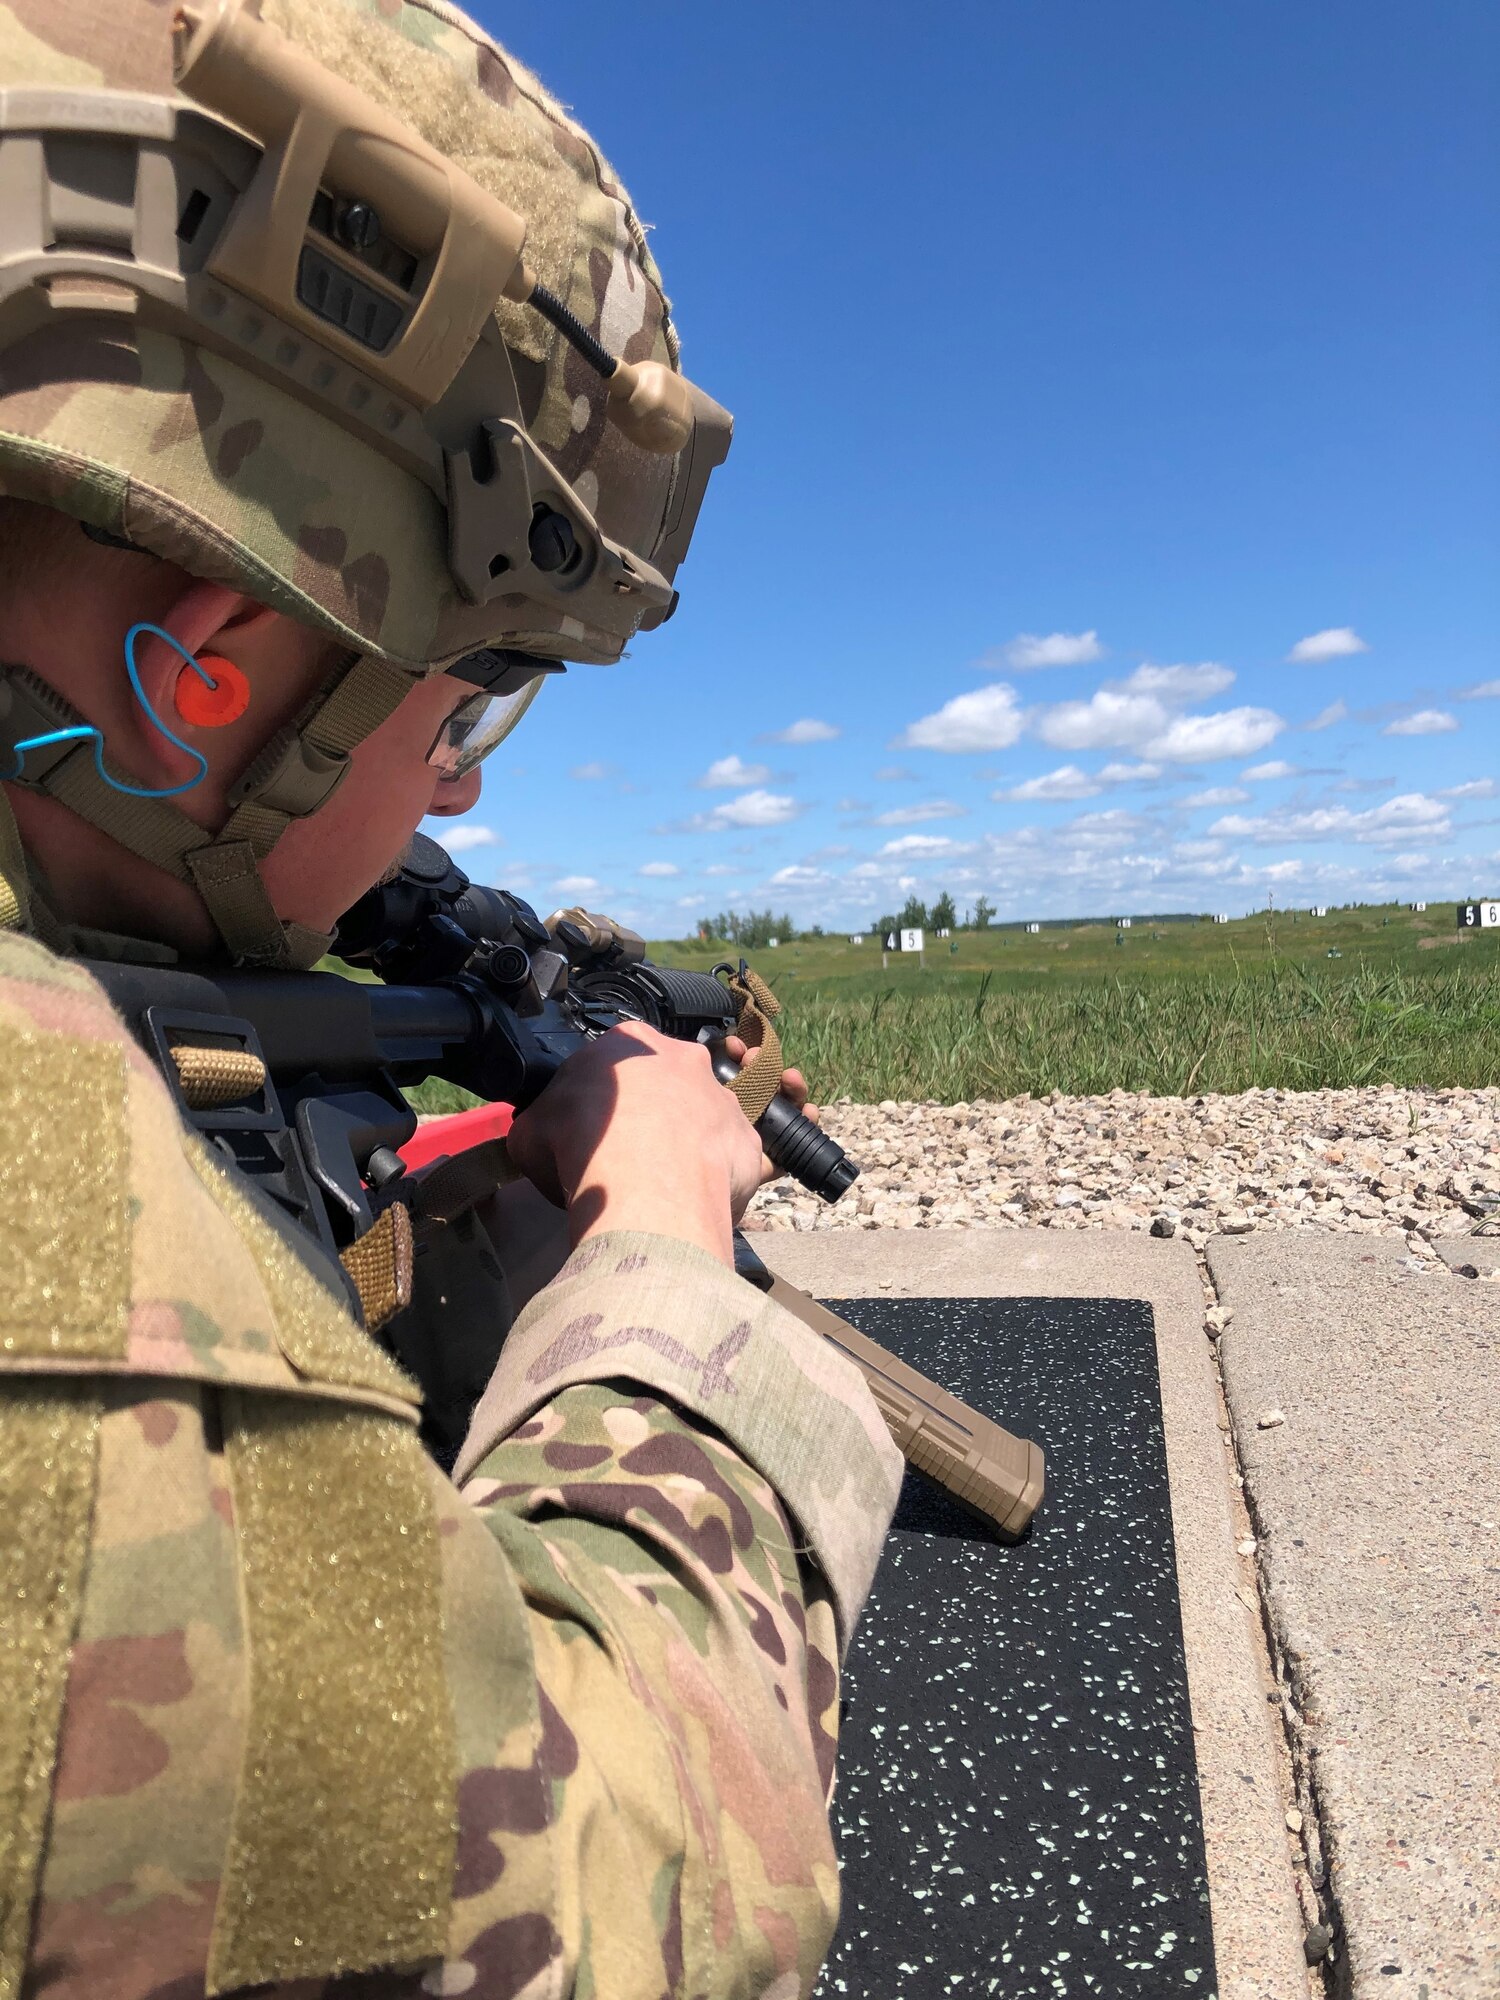 An Air National Guard Explosive Ordnance Disposal technician trains using advanced marksmanship techniques during a field training exercise at Camp Ripley Training Center, Minnesota, July 20-24, 2020.